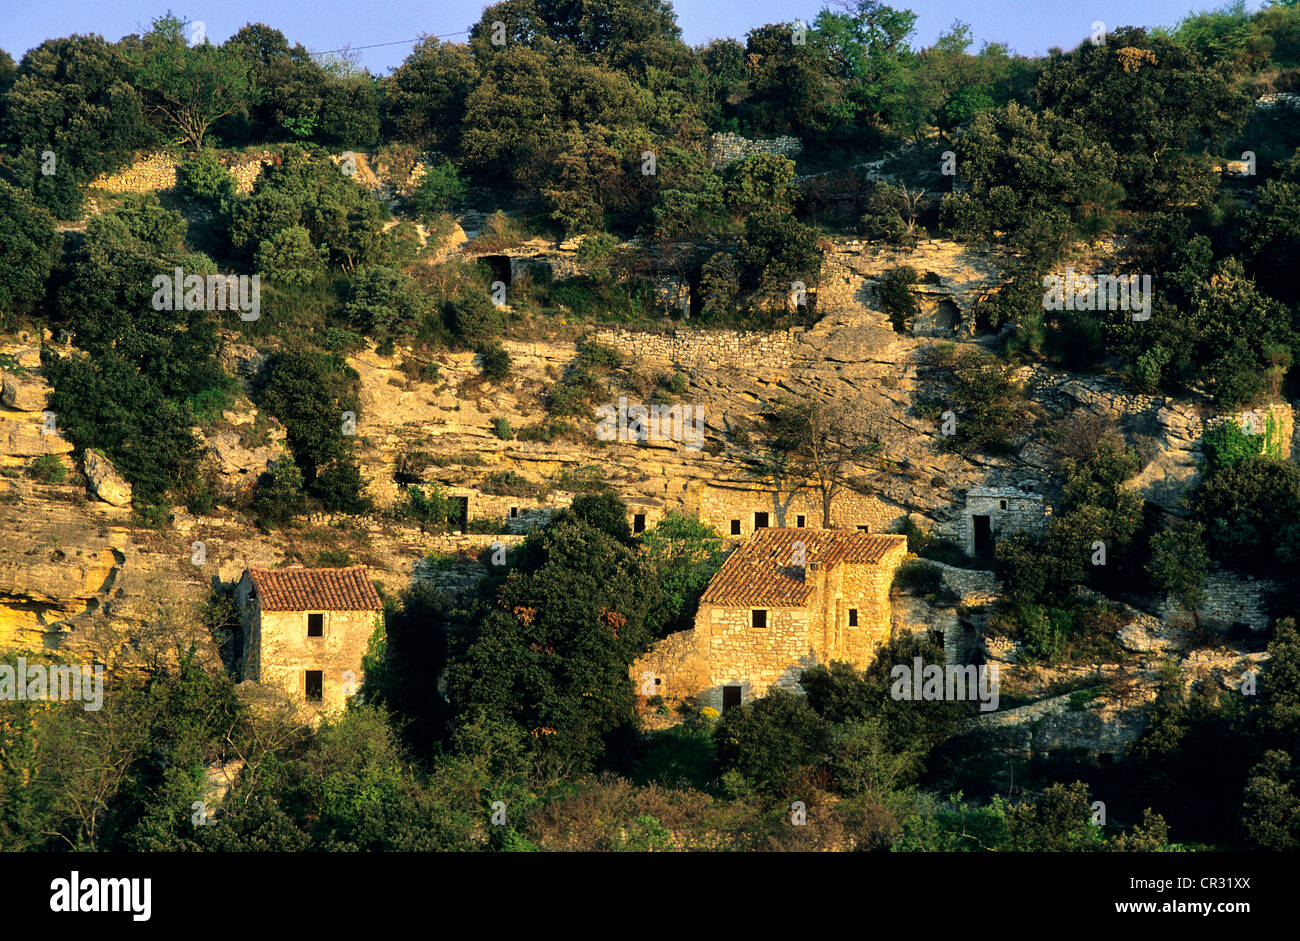 France, Vaucluse, Le Barry, site of half troglodytic dwellings Stock Photo